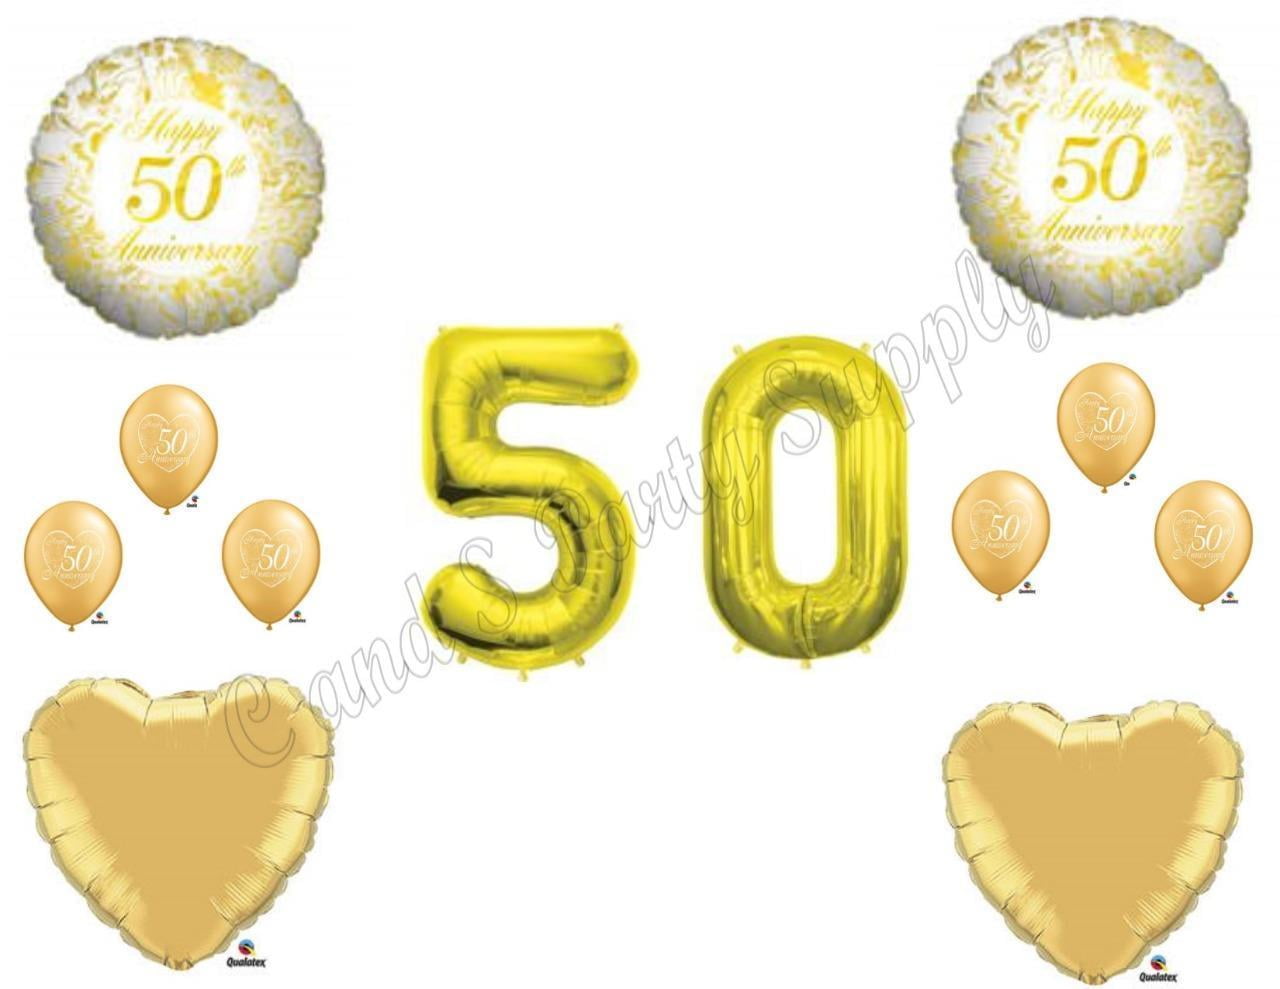 50TH GOLDEN ANNIVERSARY Balloons Birthday party Decoration Supplies Wedding Bell 